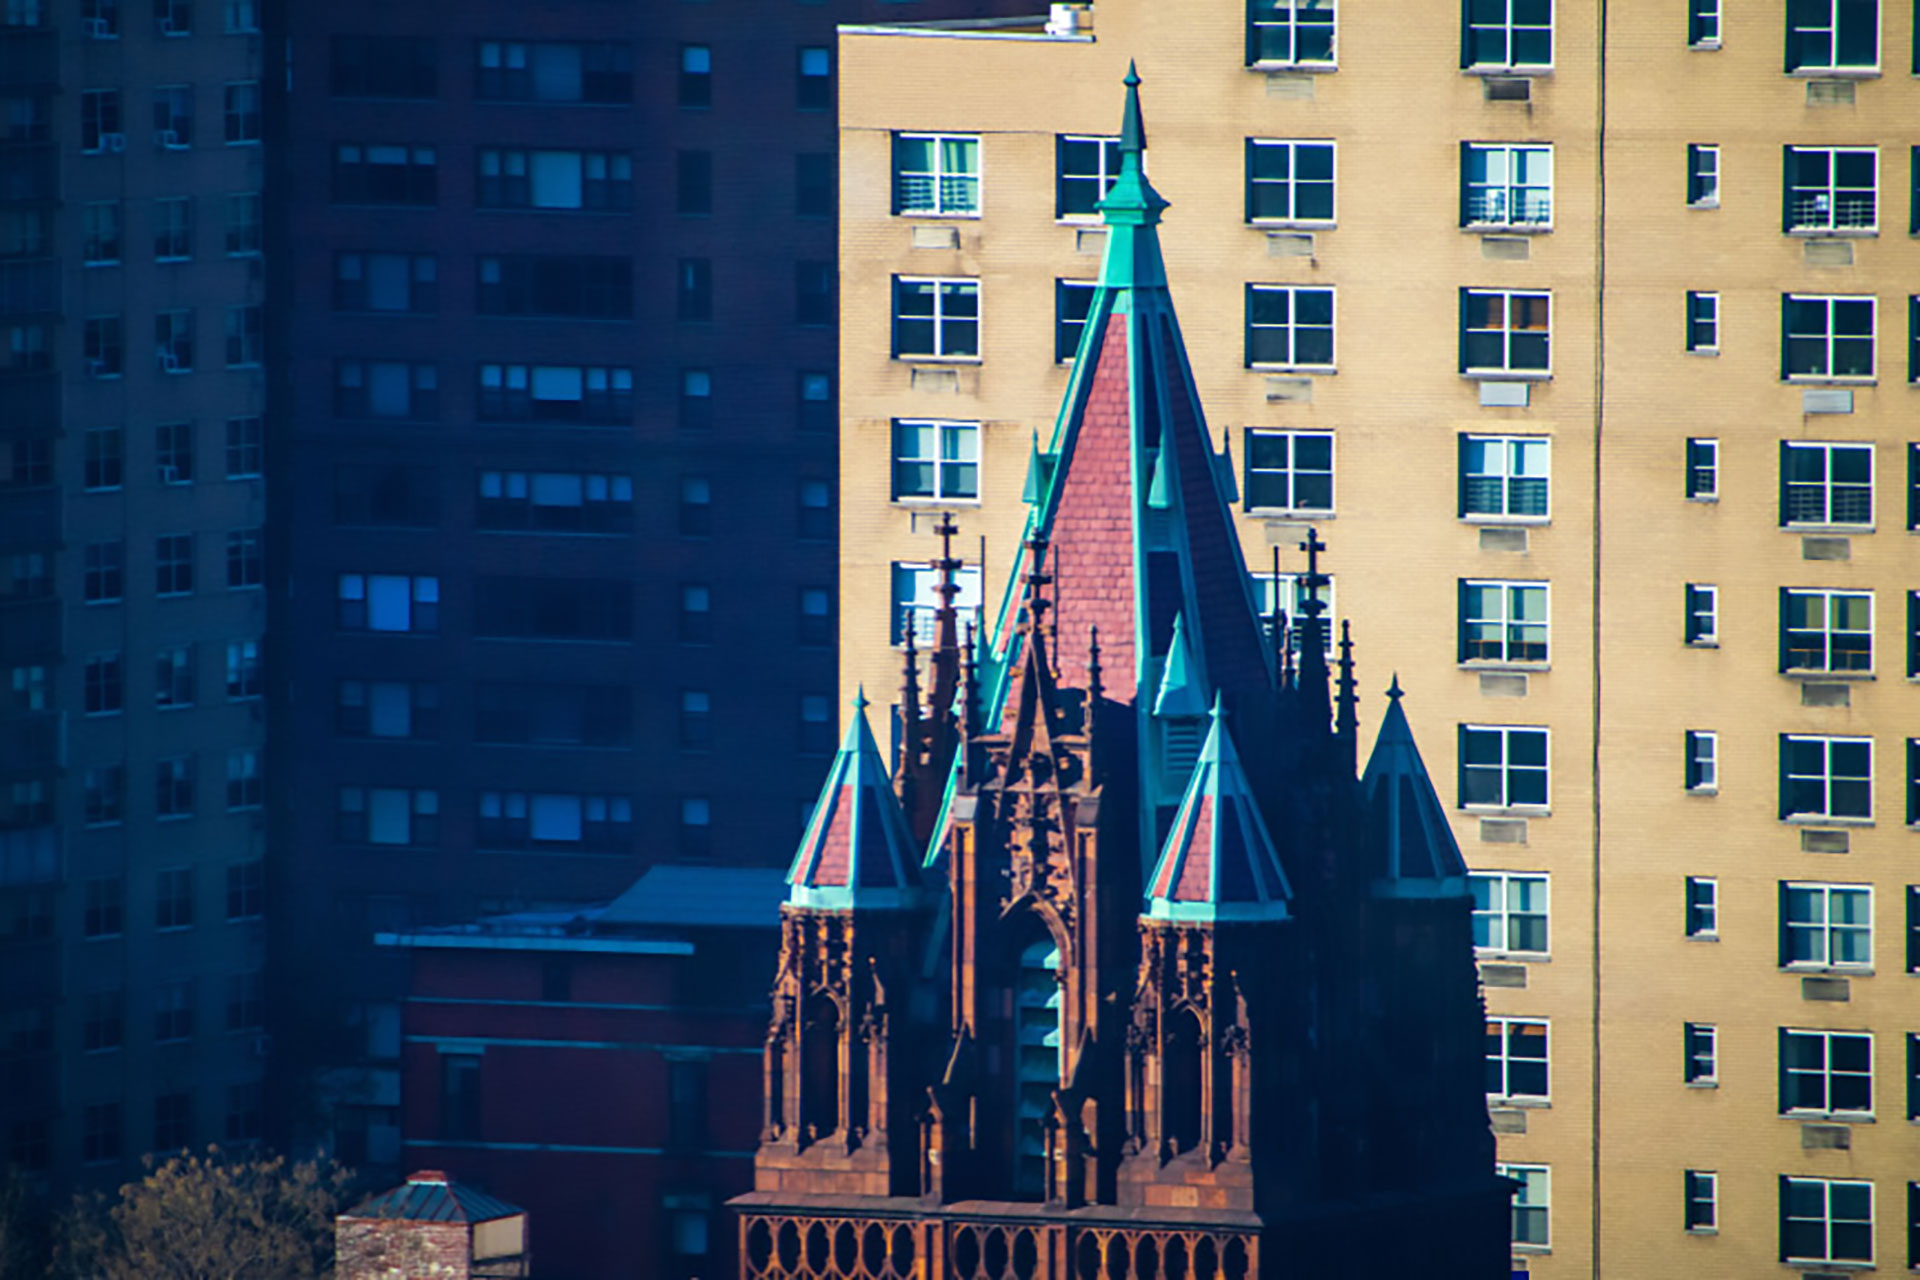 A church located in downtown New York City